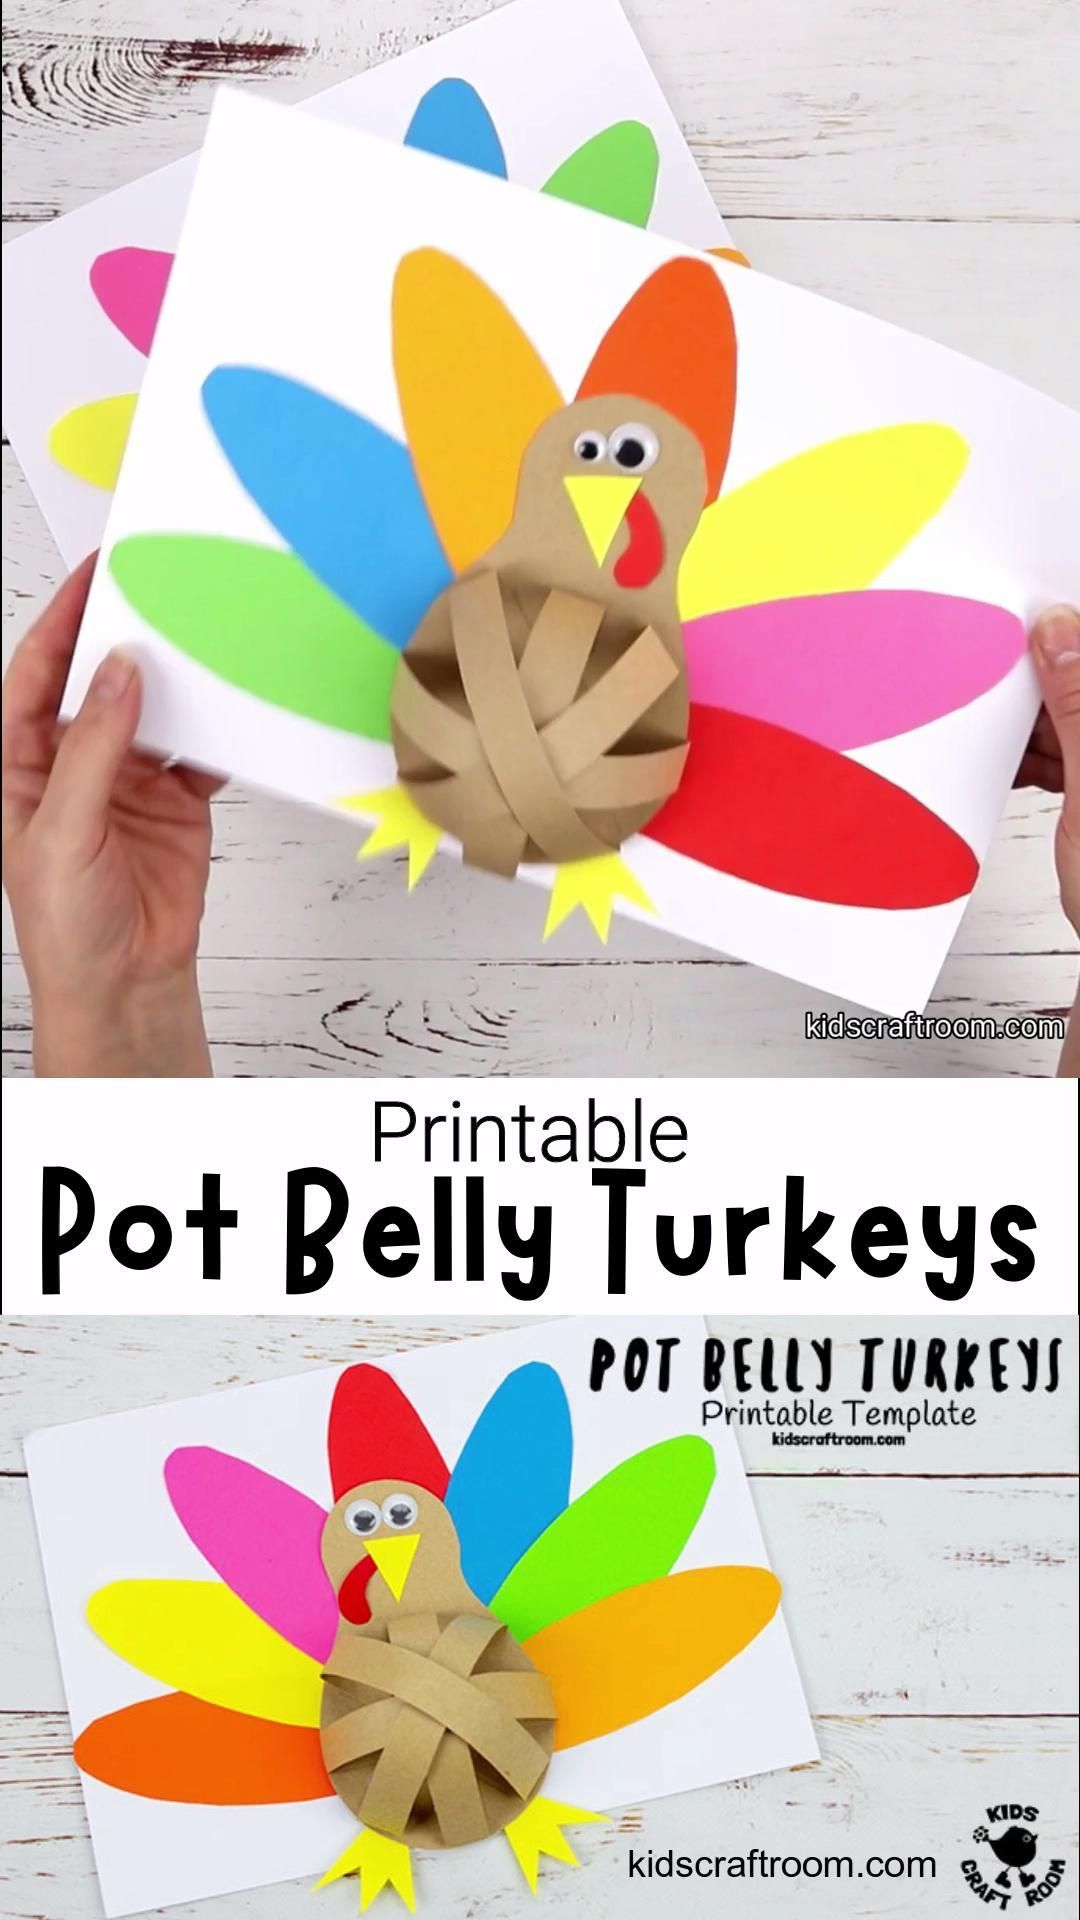 19 thanksgiving crafts for kids ideas